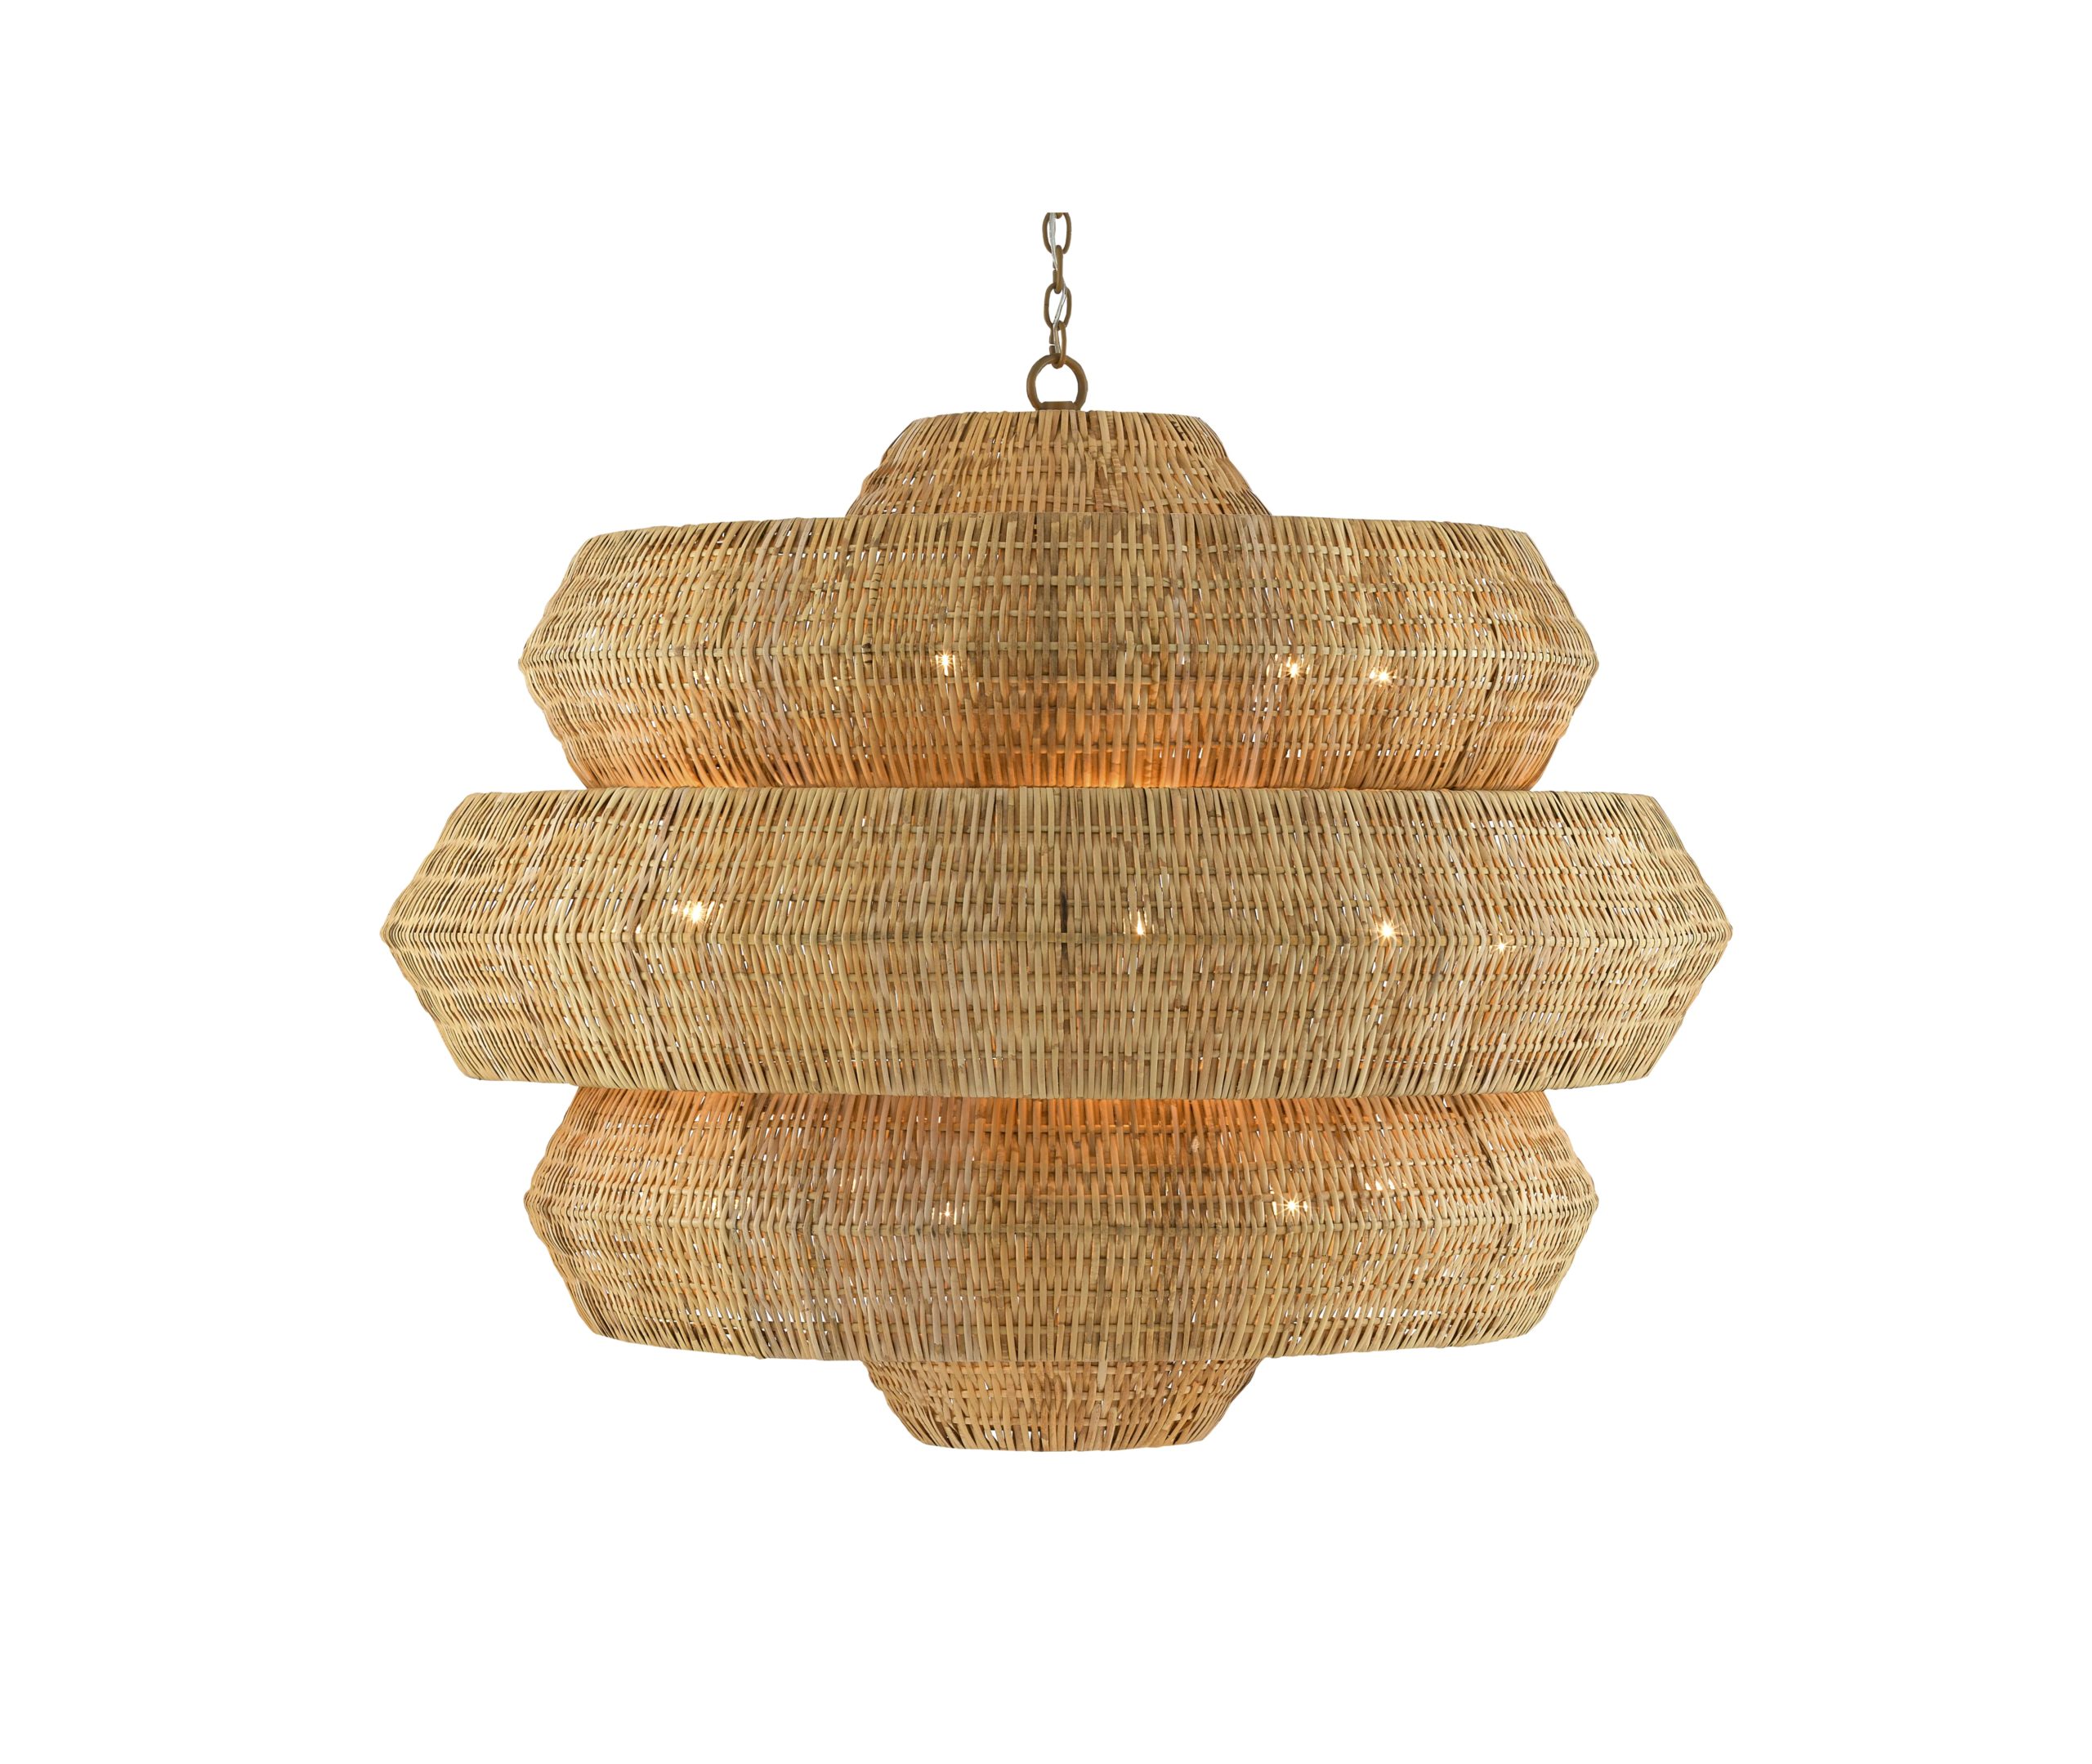 NYDC_WNWN_currey_and_co_products_antibes_grande_chandelier_9000-0496_